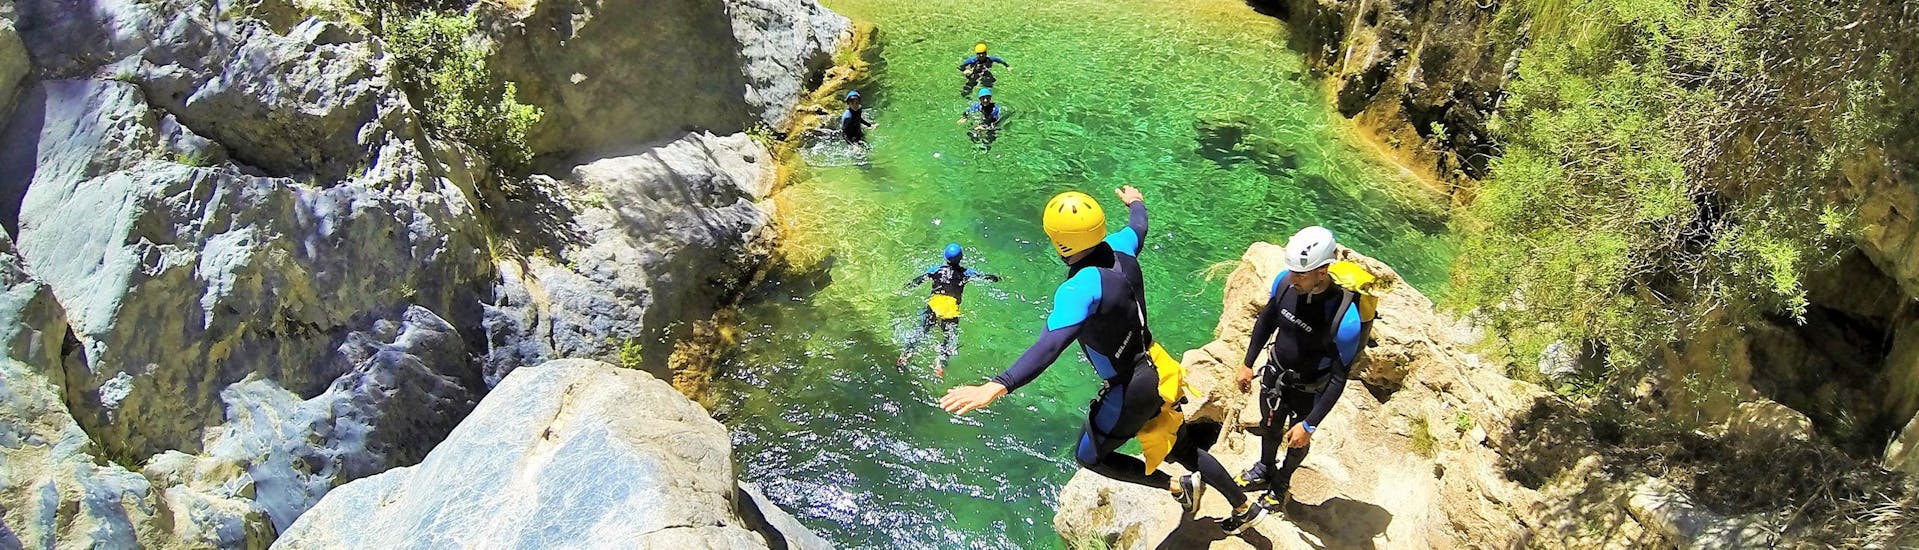 Some participants have fun during their canyoning tour with Barranquismo Rio Verde while jumping from a cliff into the crystal clear waters.